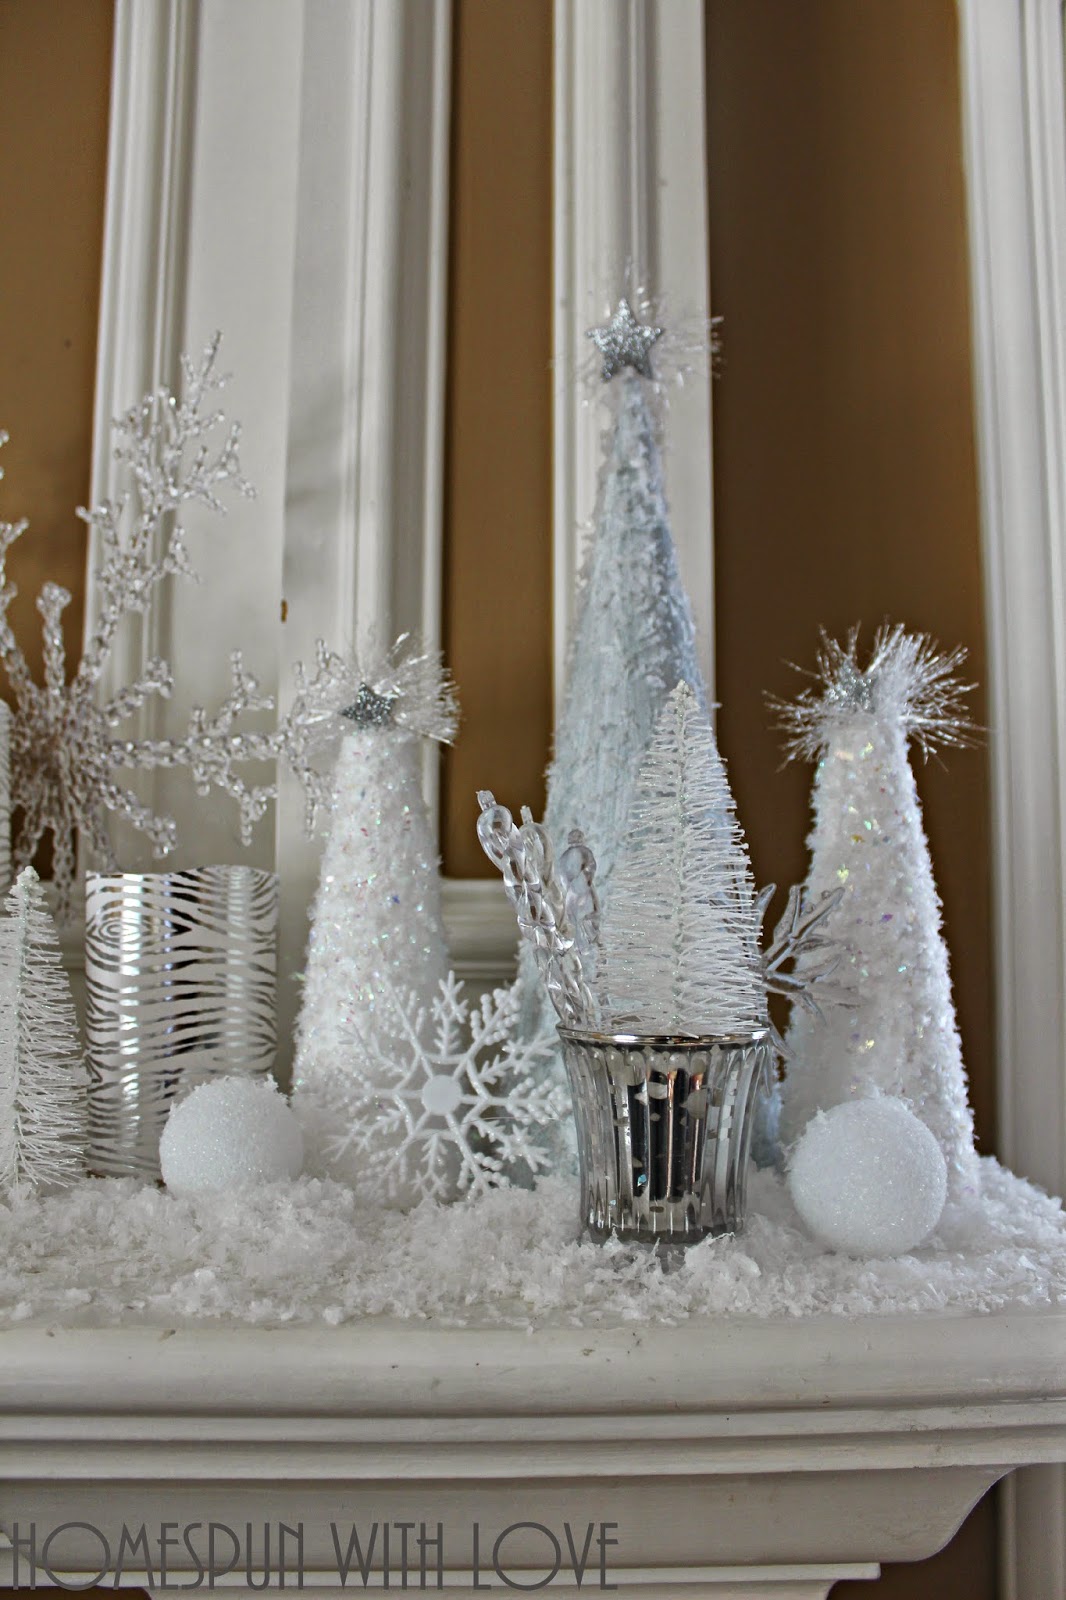 Homespun With Love: Simple Cone White Christmas Trees